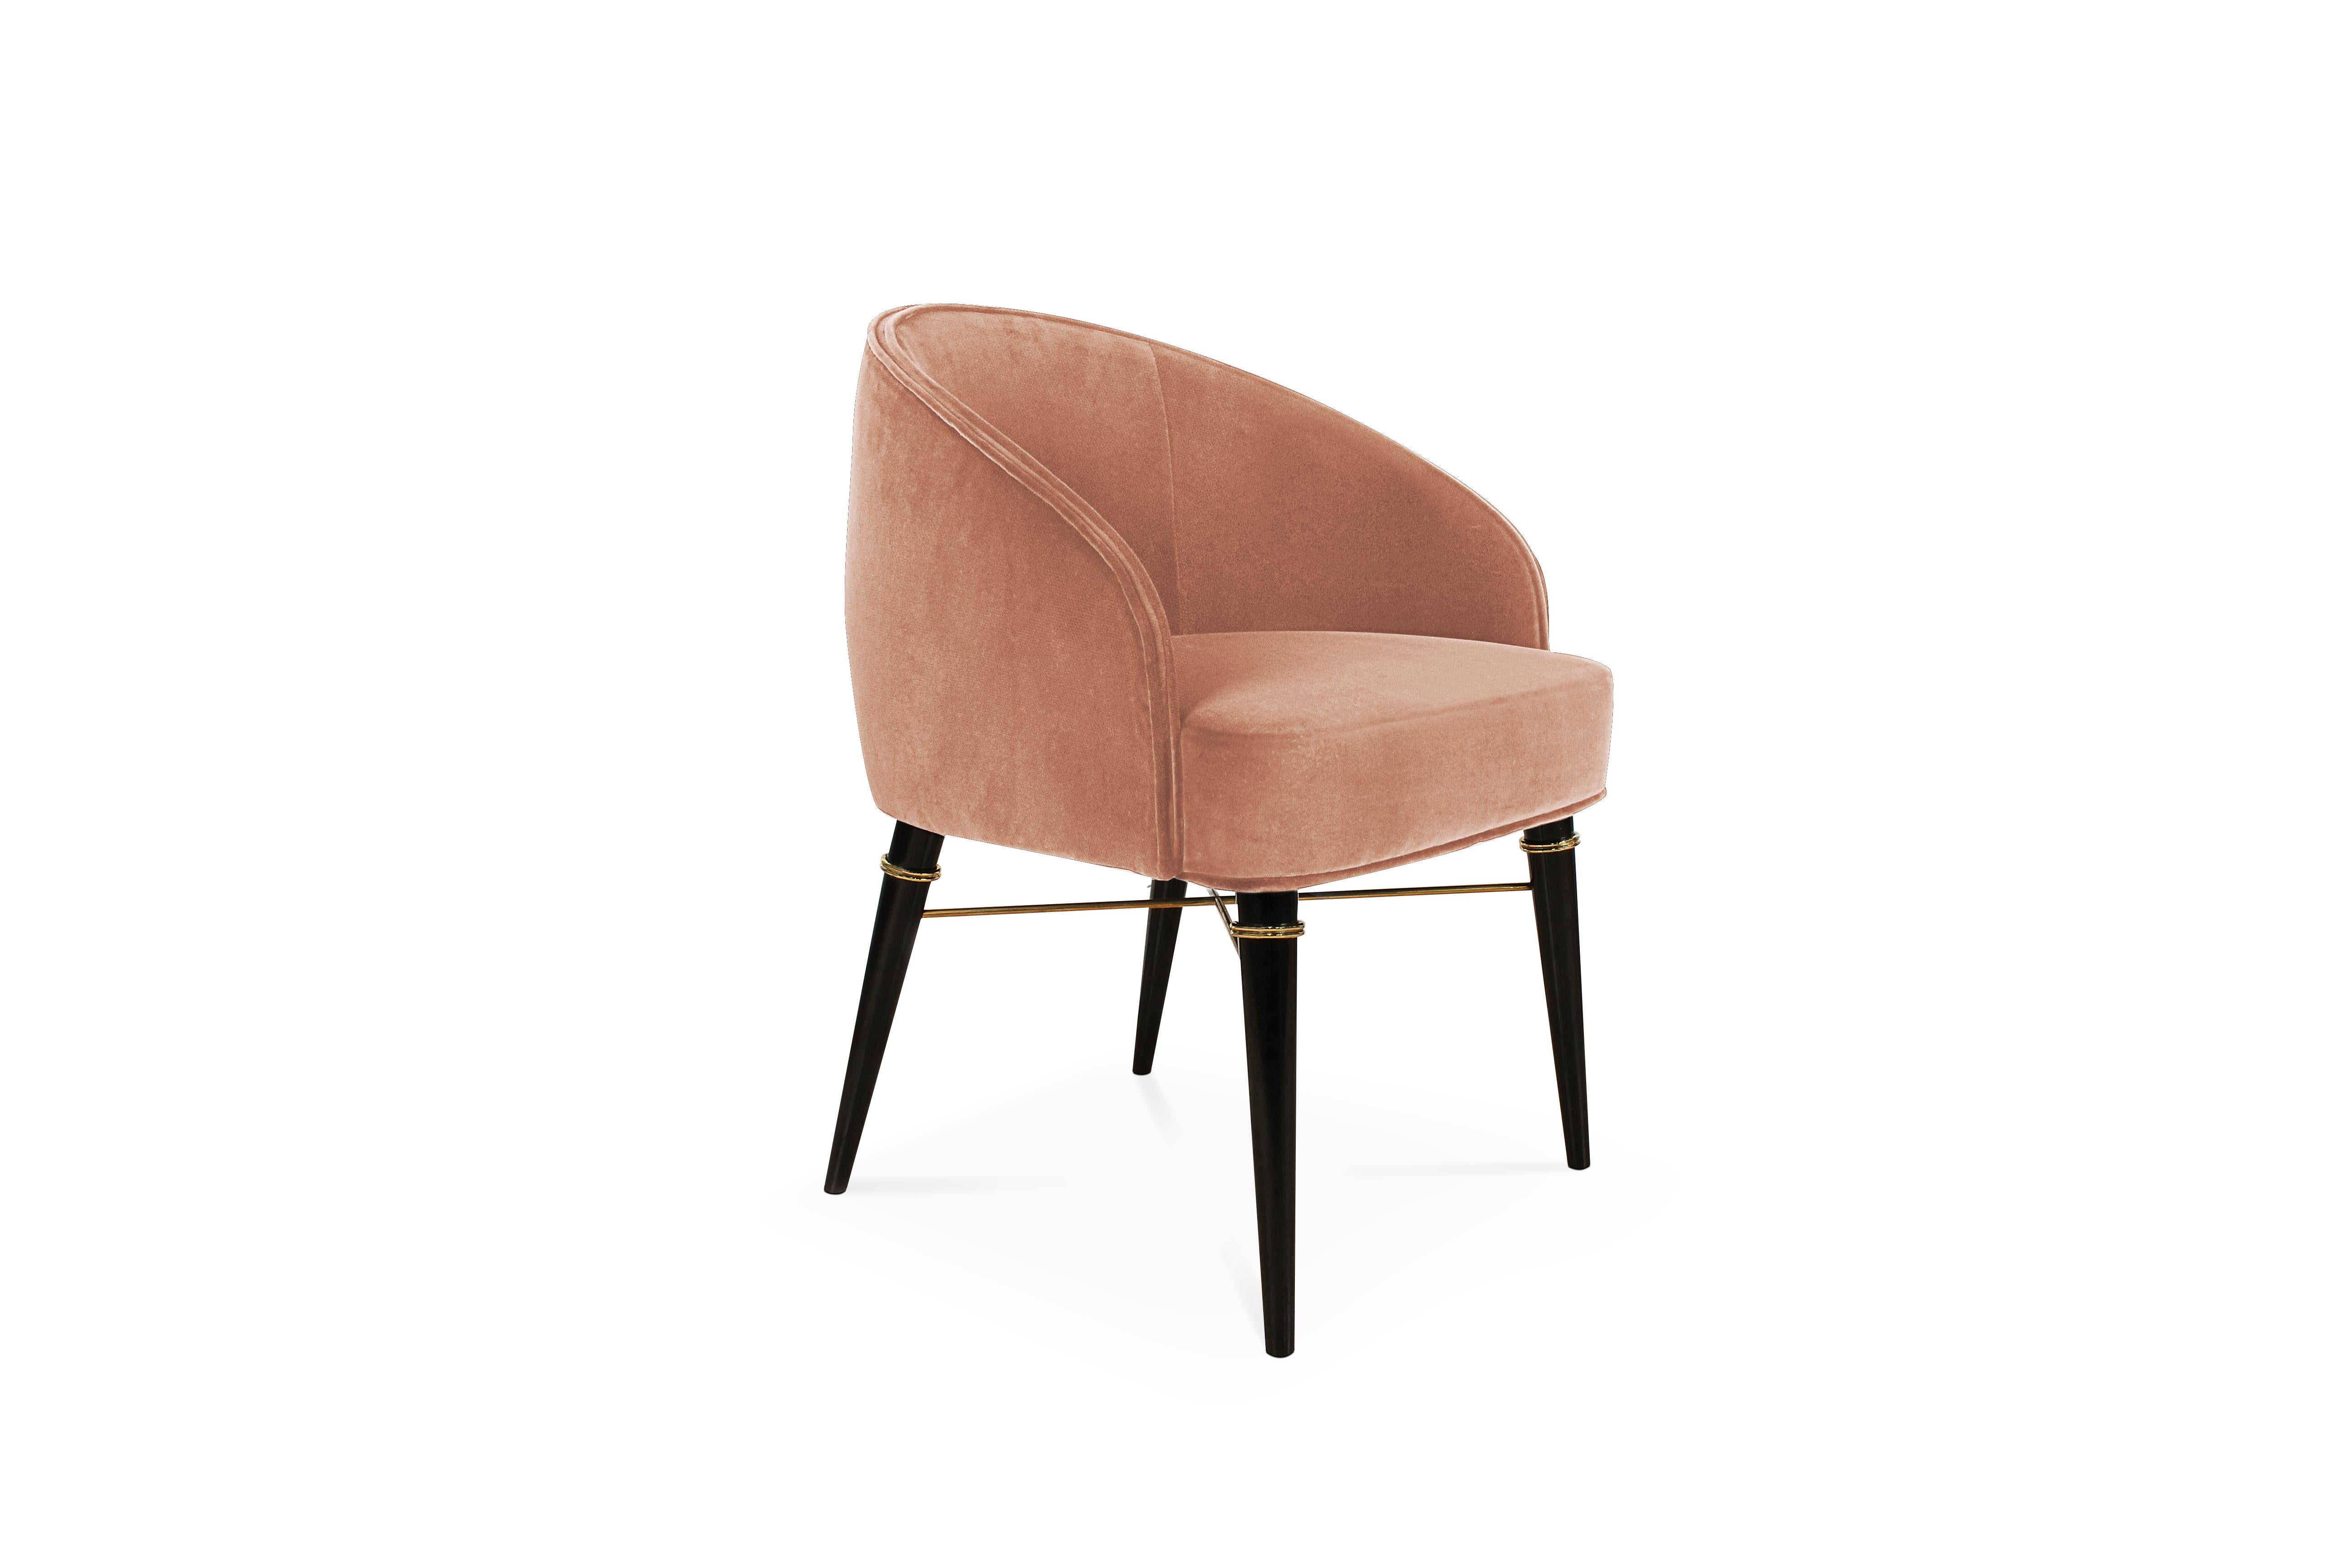 This dining chair is inspired by the natural and unpretentious beauty of one of Hollywood’s brightest movie stars of all time: Ingrid Bergman. With an involving backrest lined with soft cotton velvet, the Ingrid Mid-Century Modern dining chair has